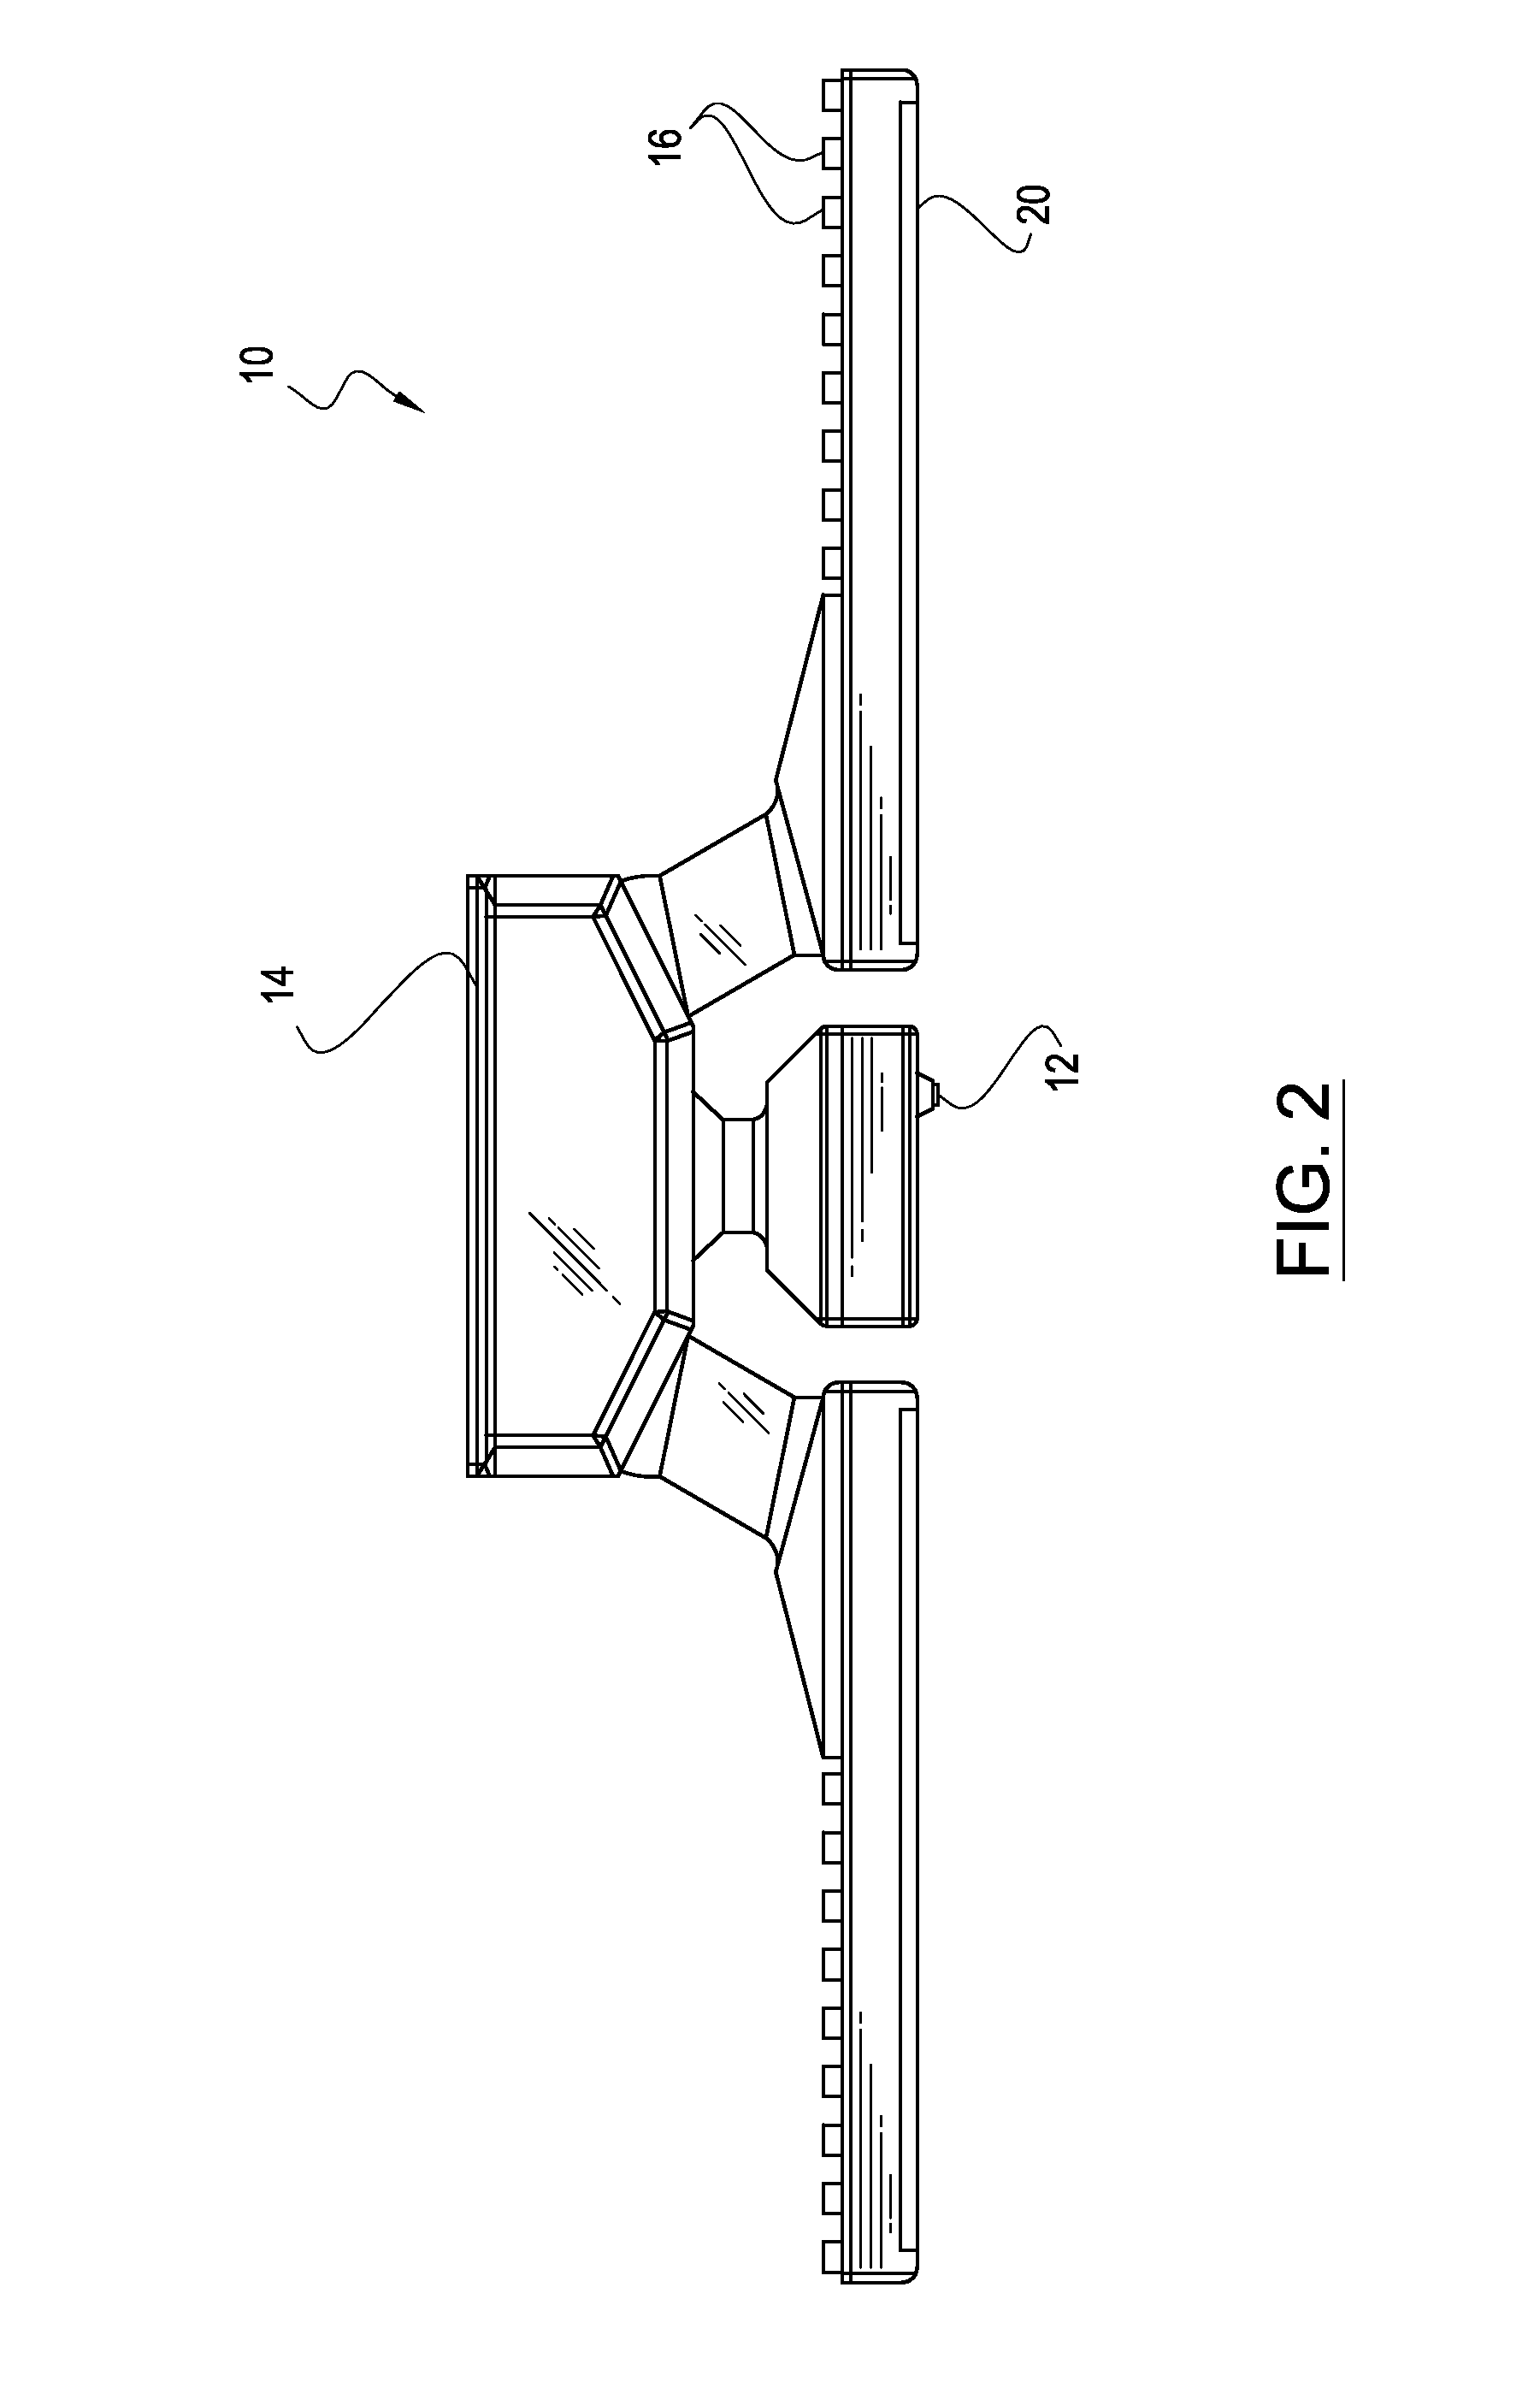 Self-Calibrating Multi-Directional Security Luminaire and Associated Methods